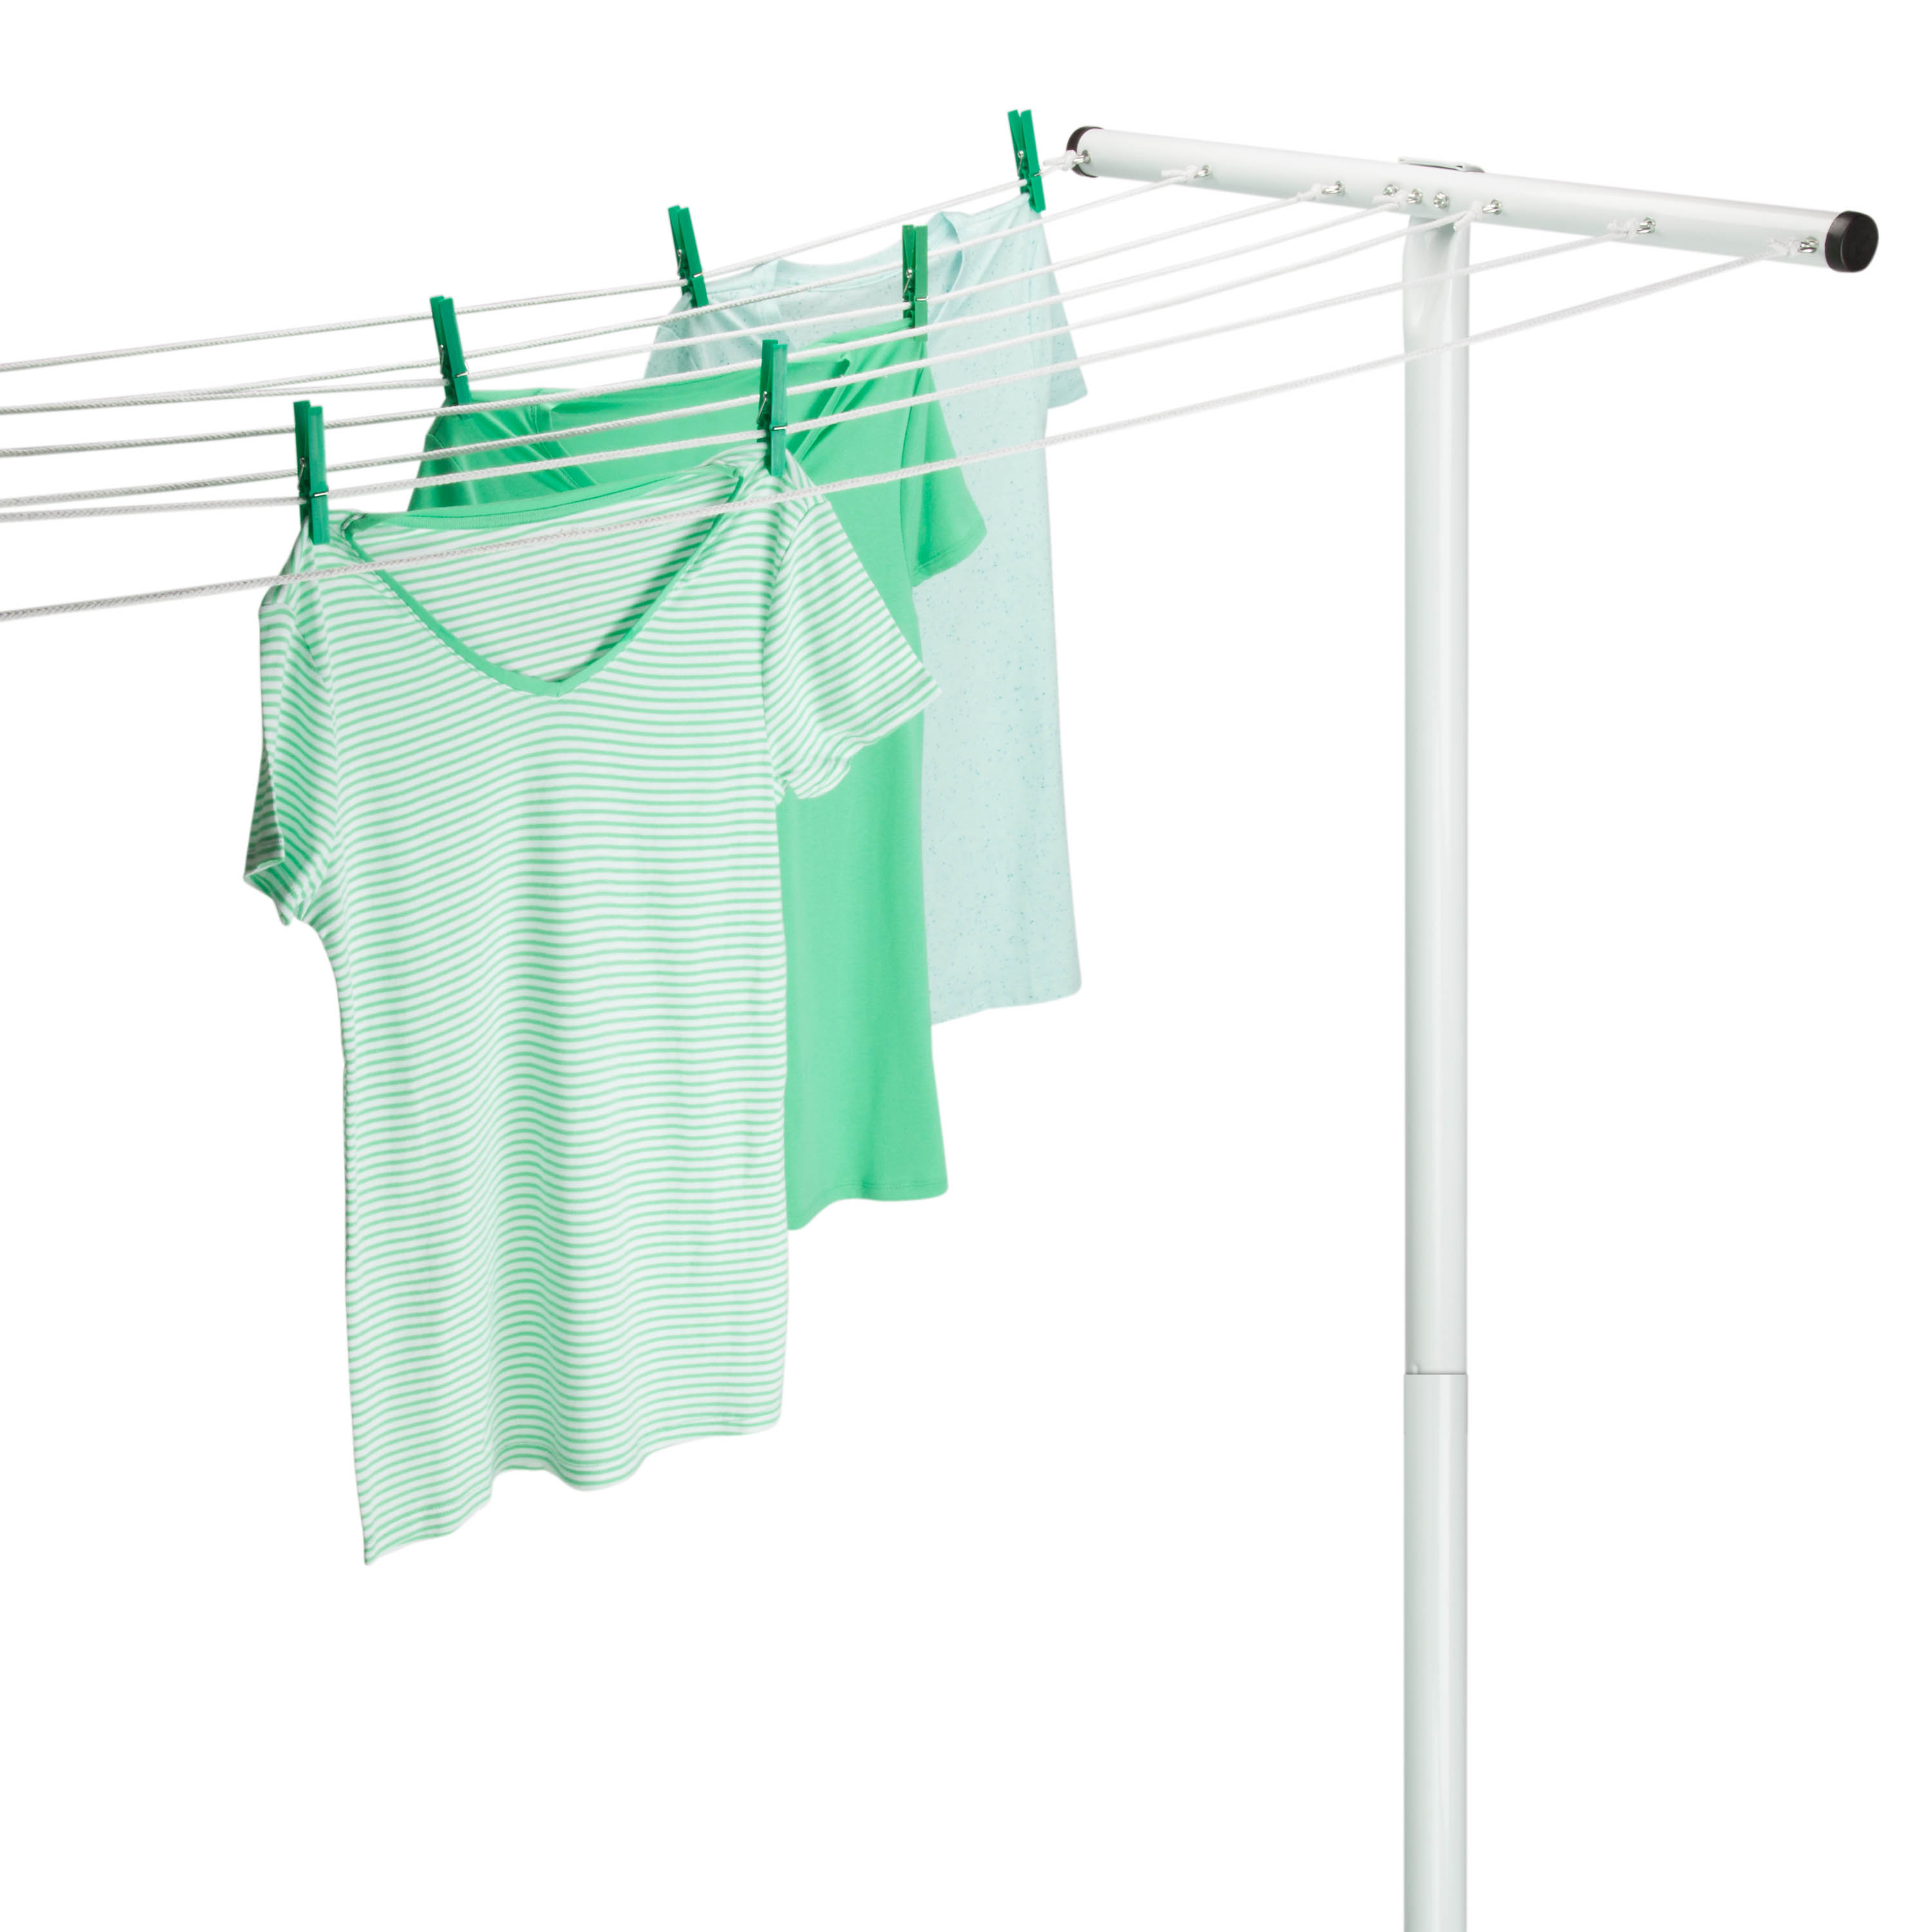 10 Best Drying Racks for Clothes - Top Drying Racks to Buy